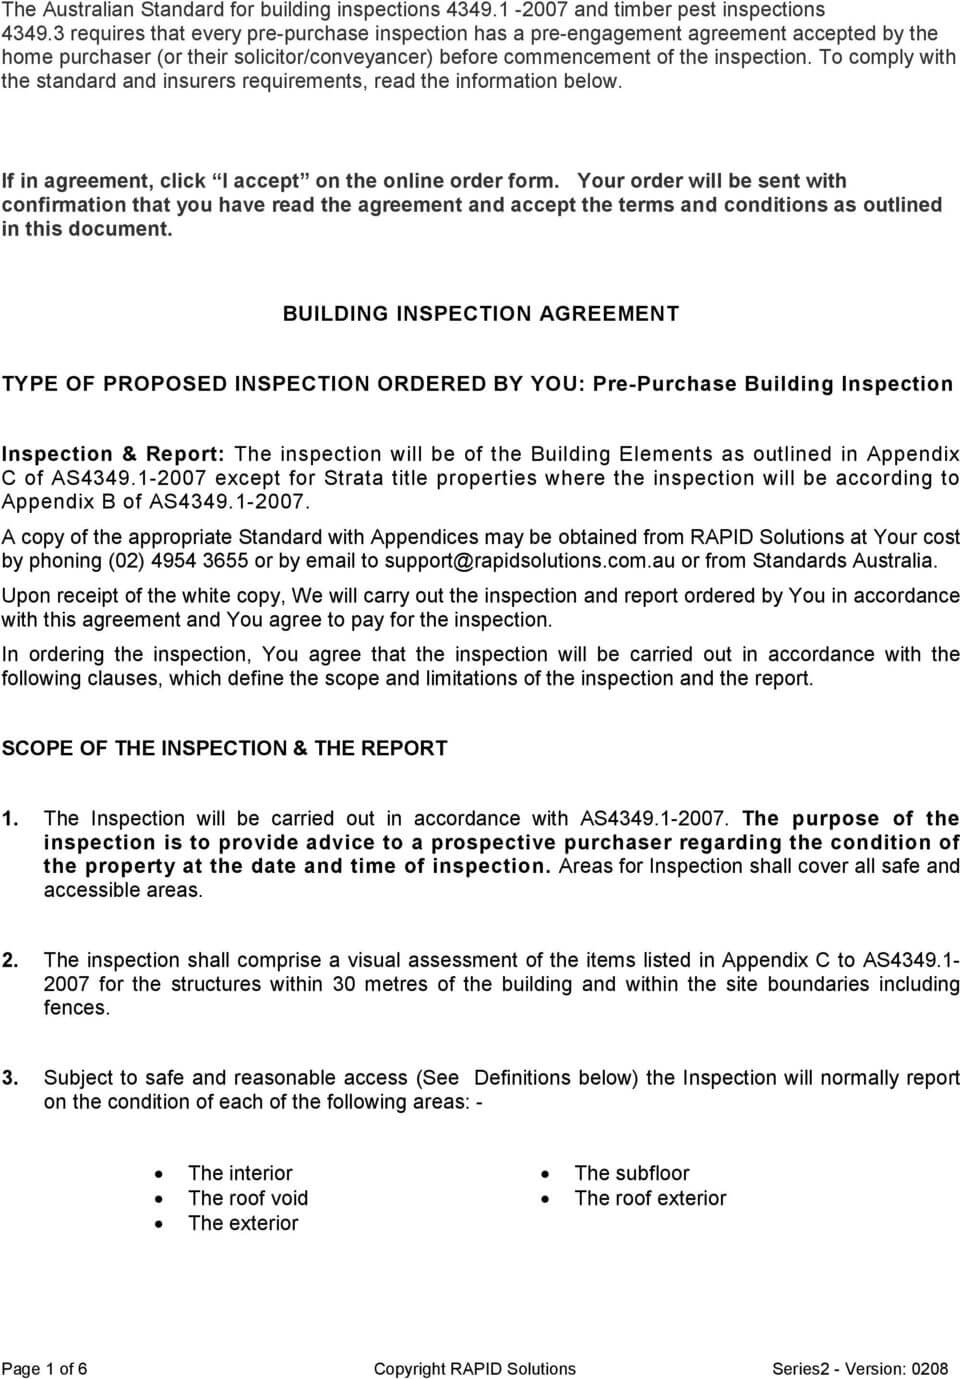 Building Inspection Agreement. Type Of Proposed Inspection Intended For Pre Purchase Building Inspection Report Template